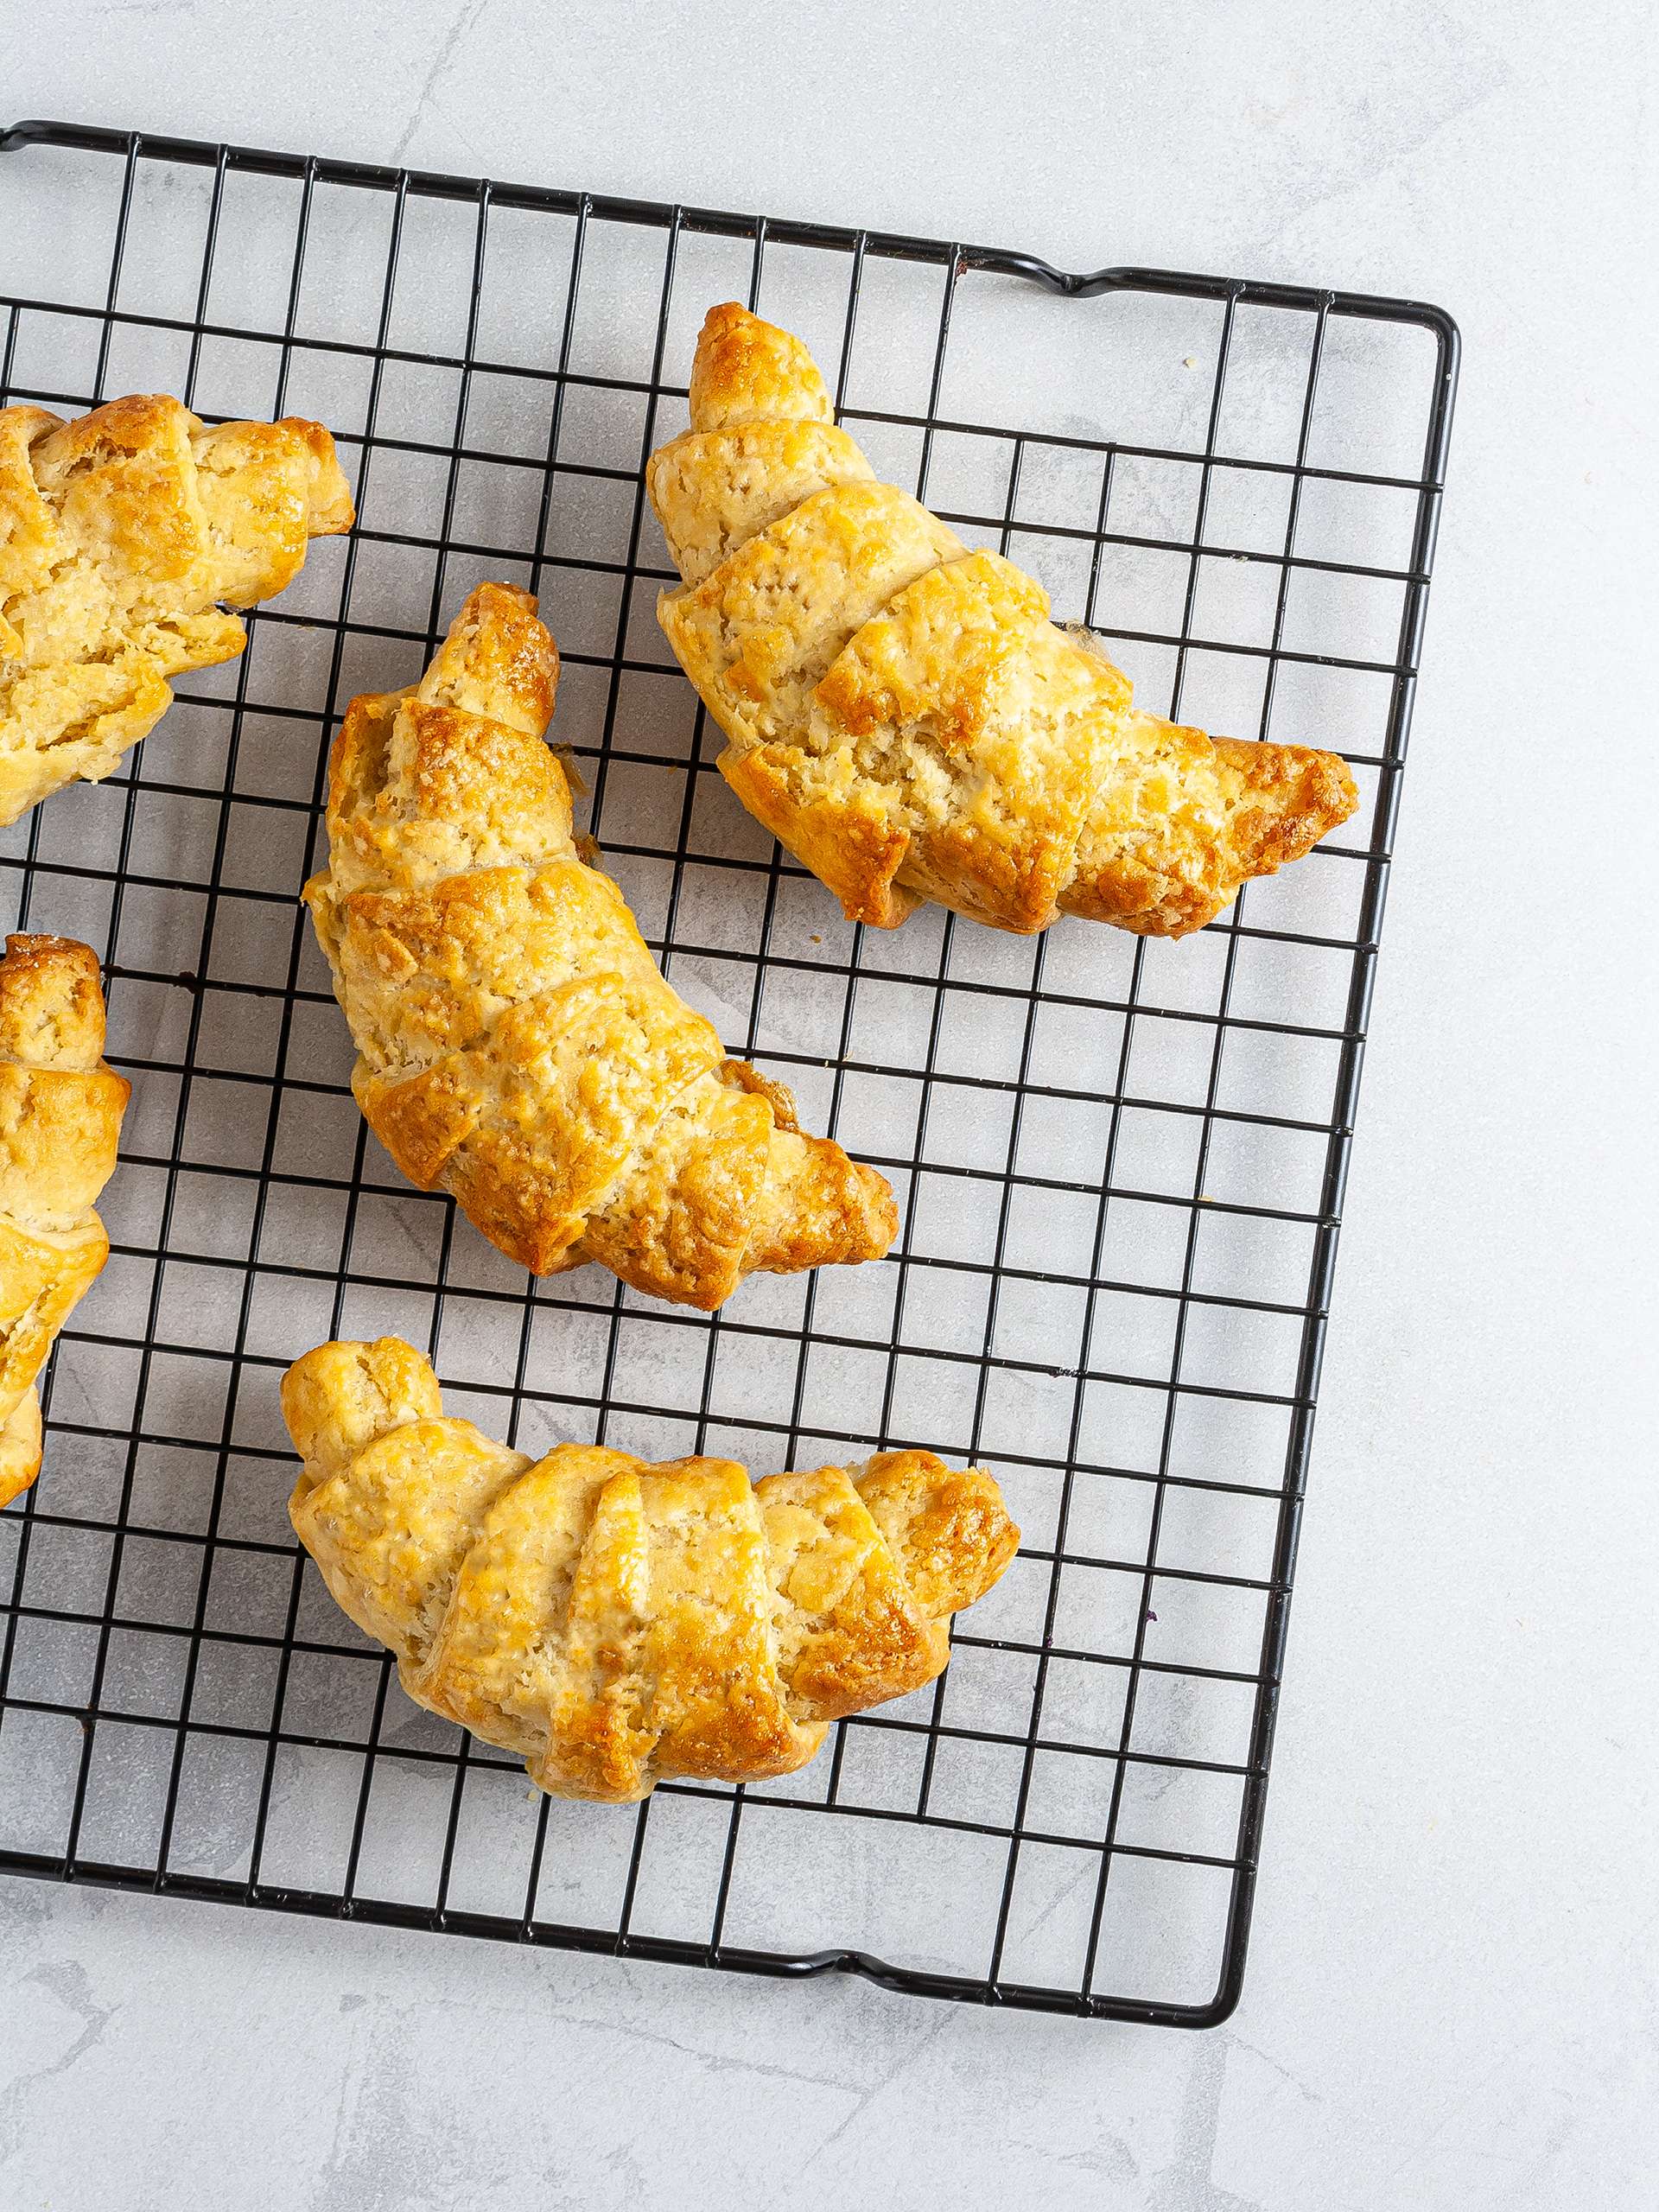 Baked croissants on a wire rack